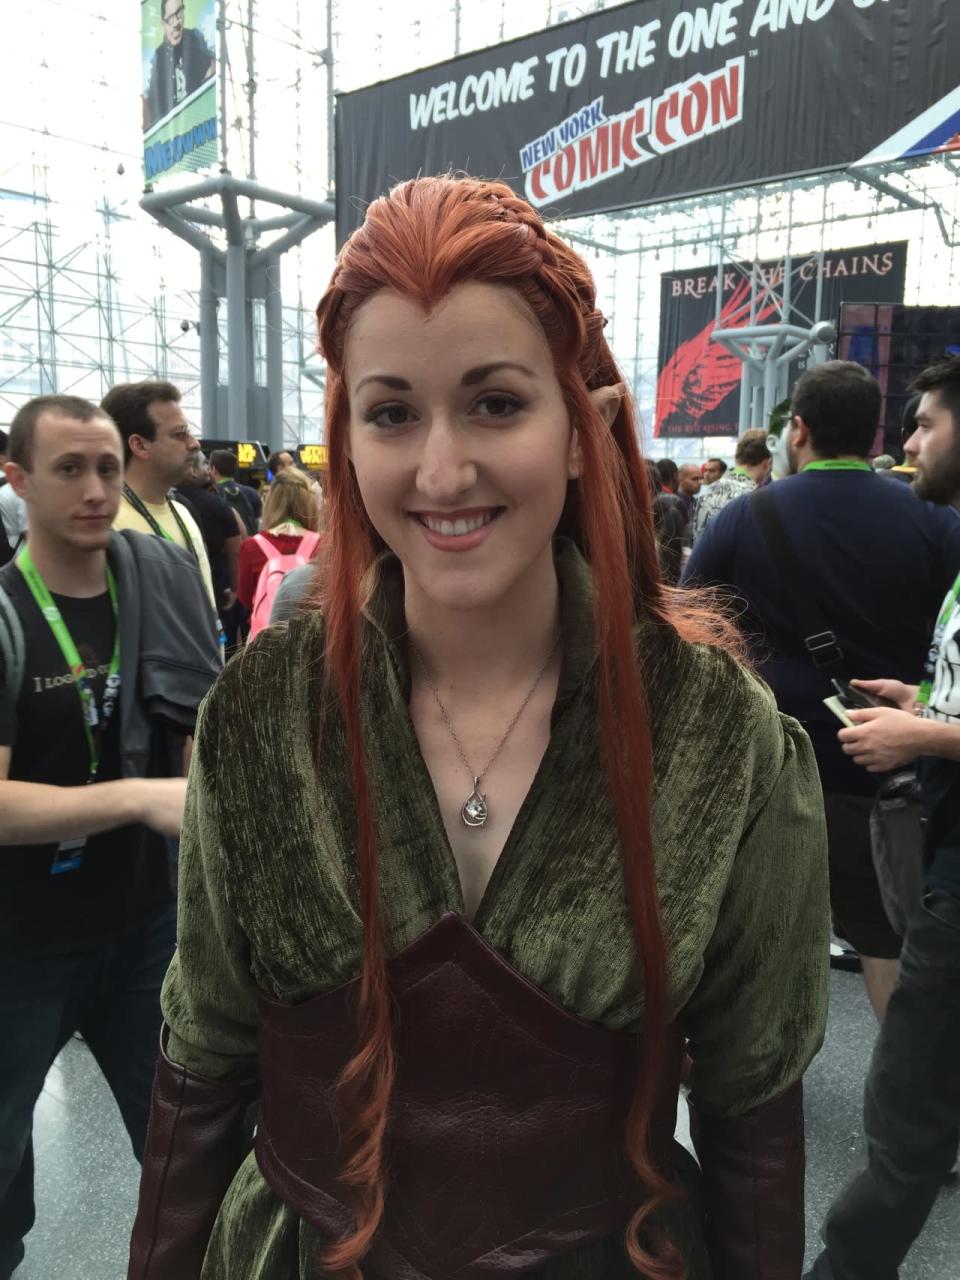 Victorial as Tauriel from “The Hobbit”